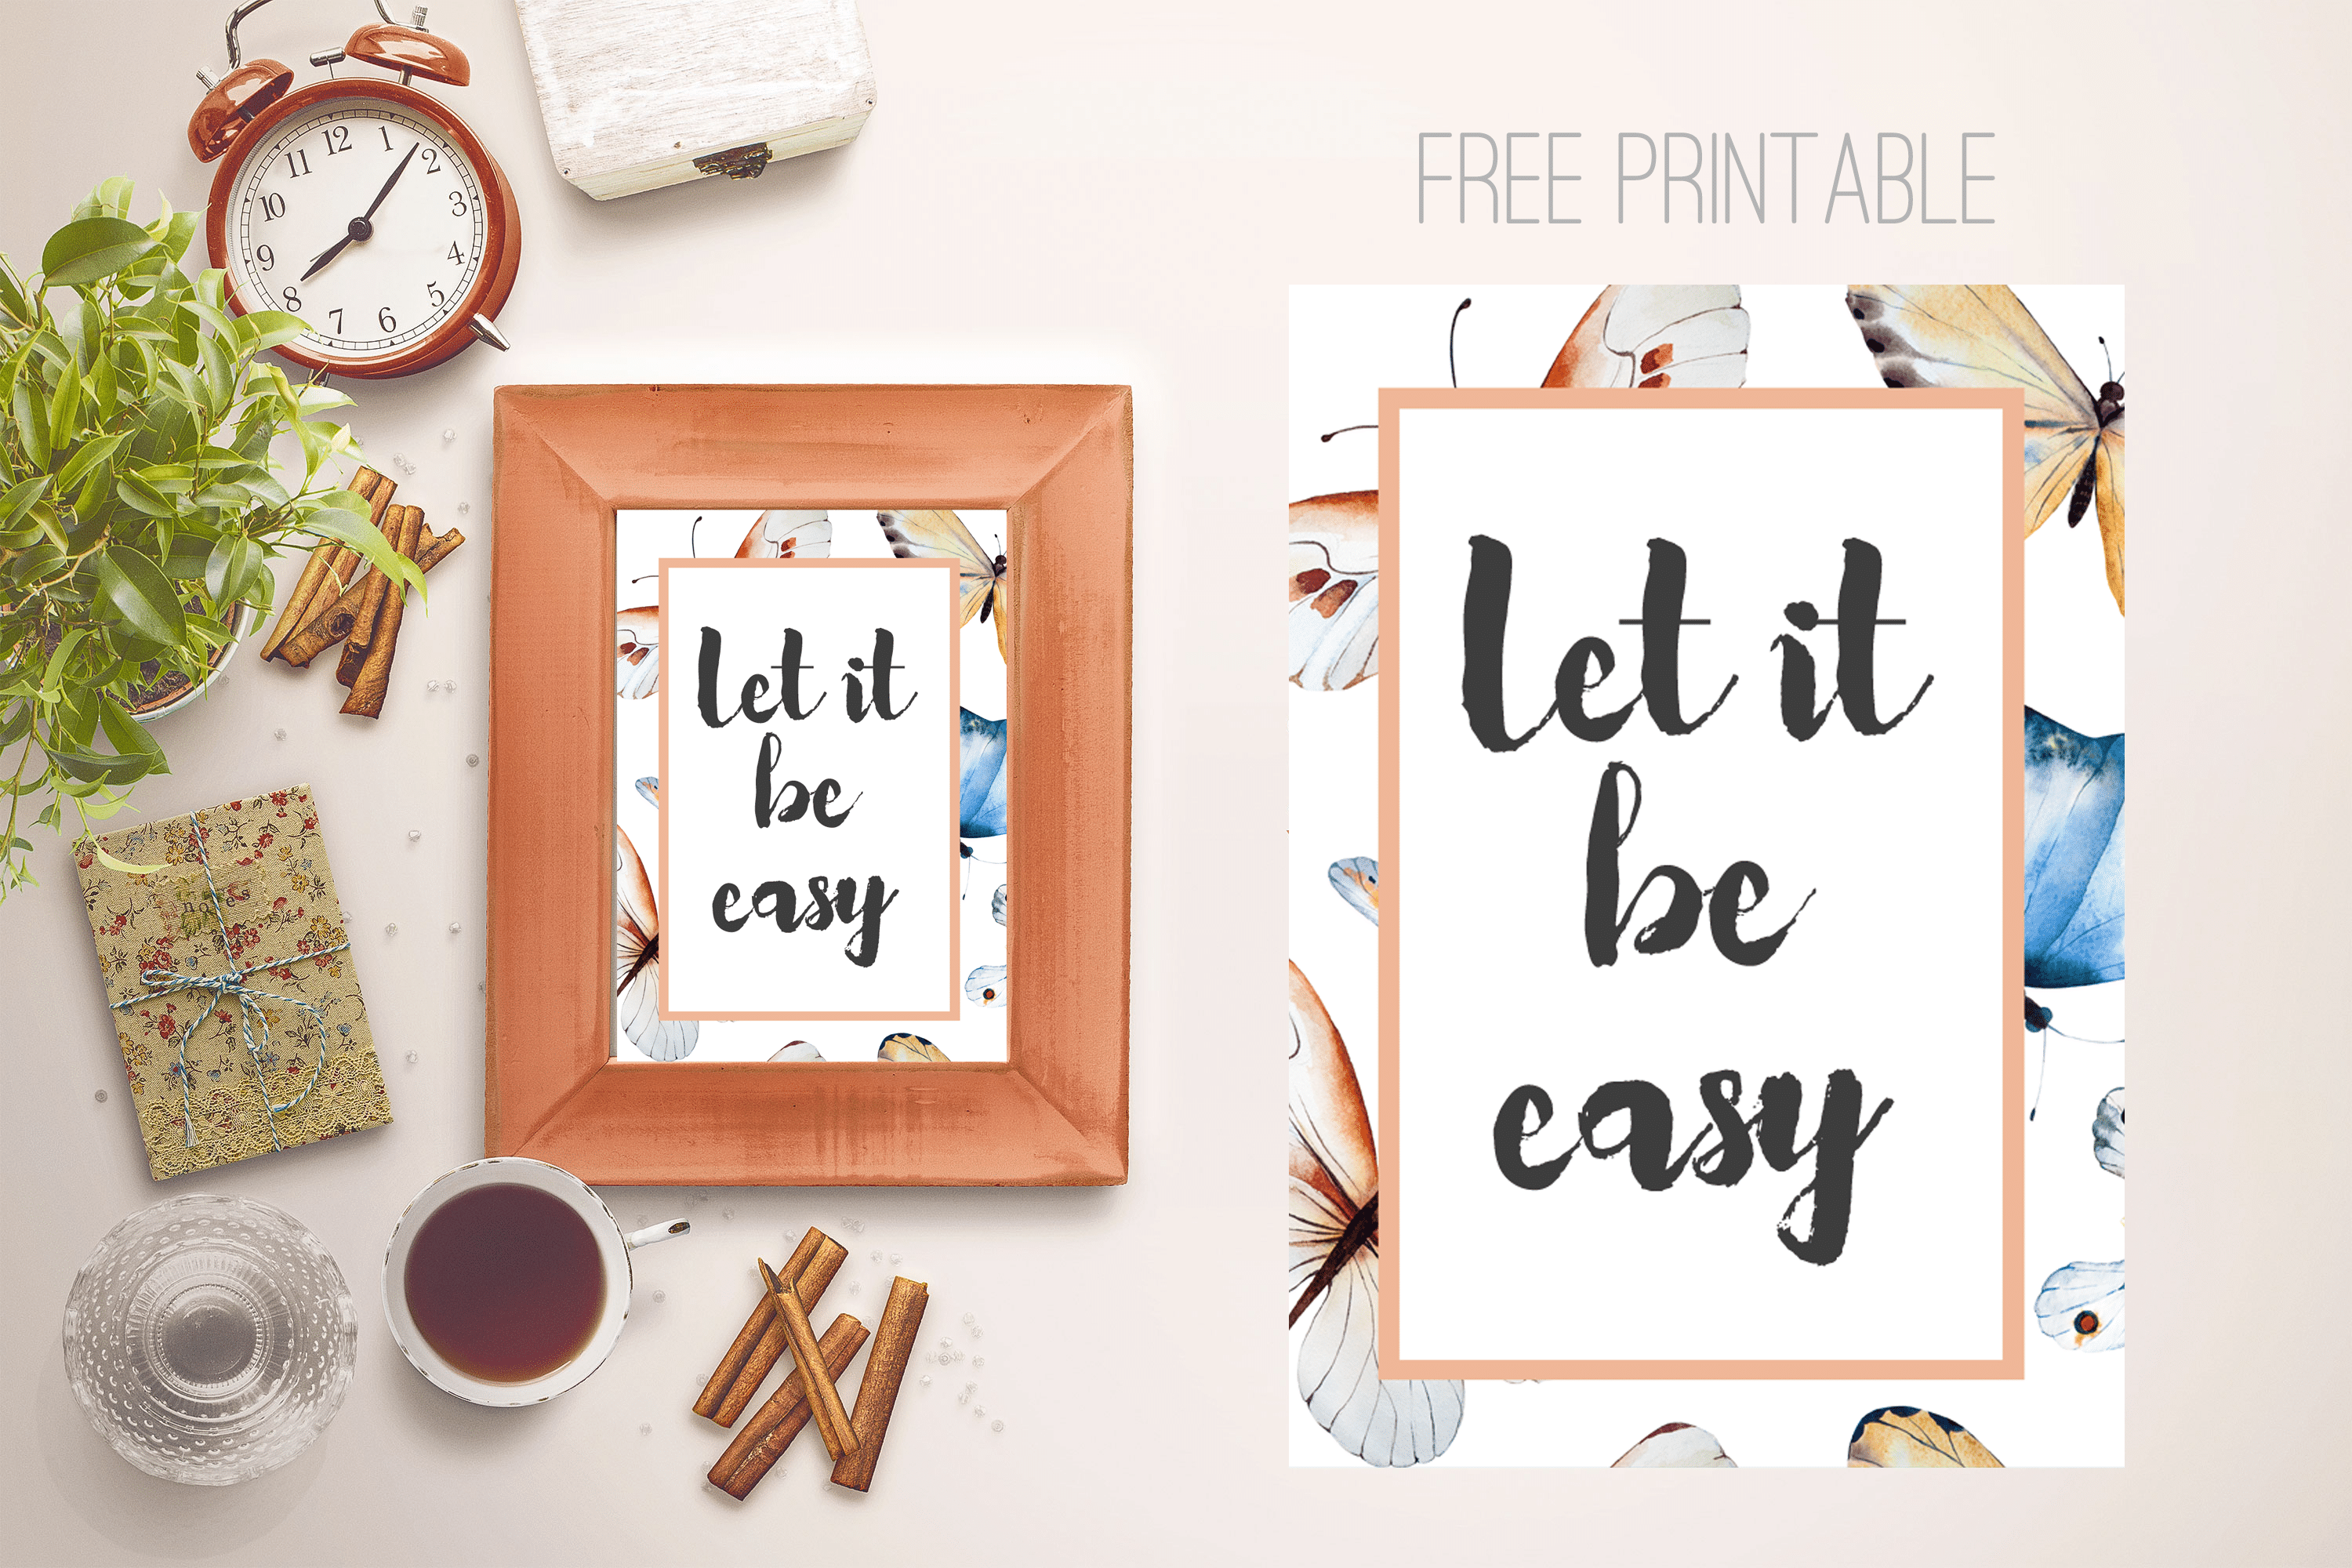 Let it be easy! (+ FREE printable)